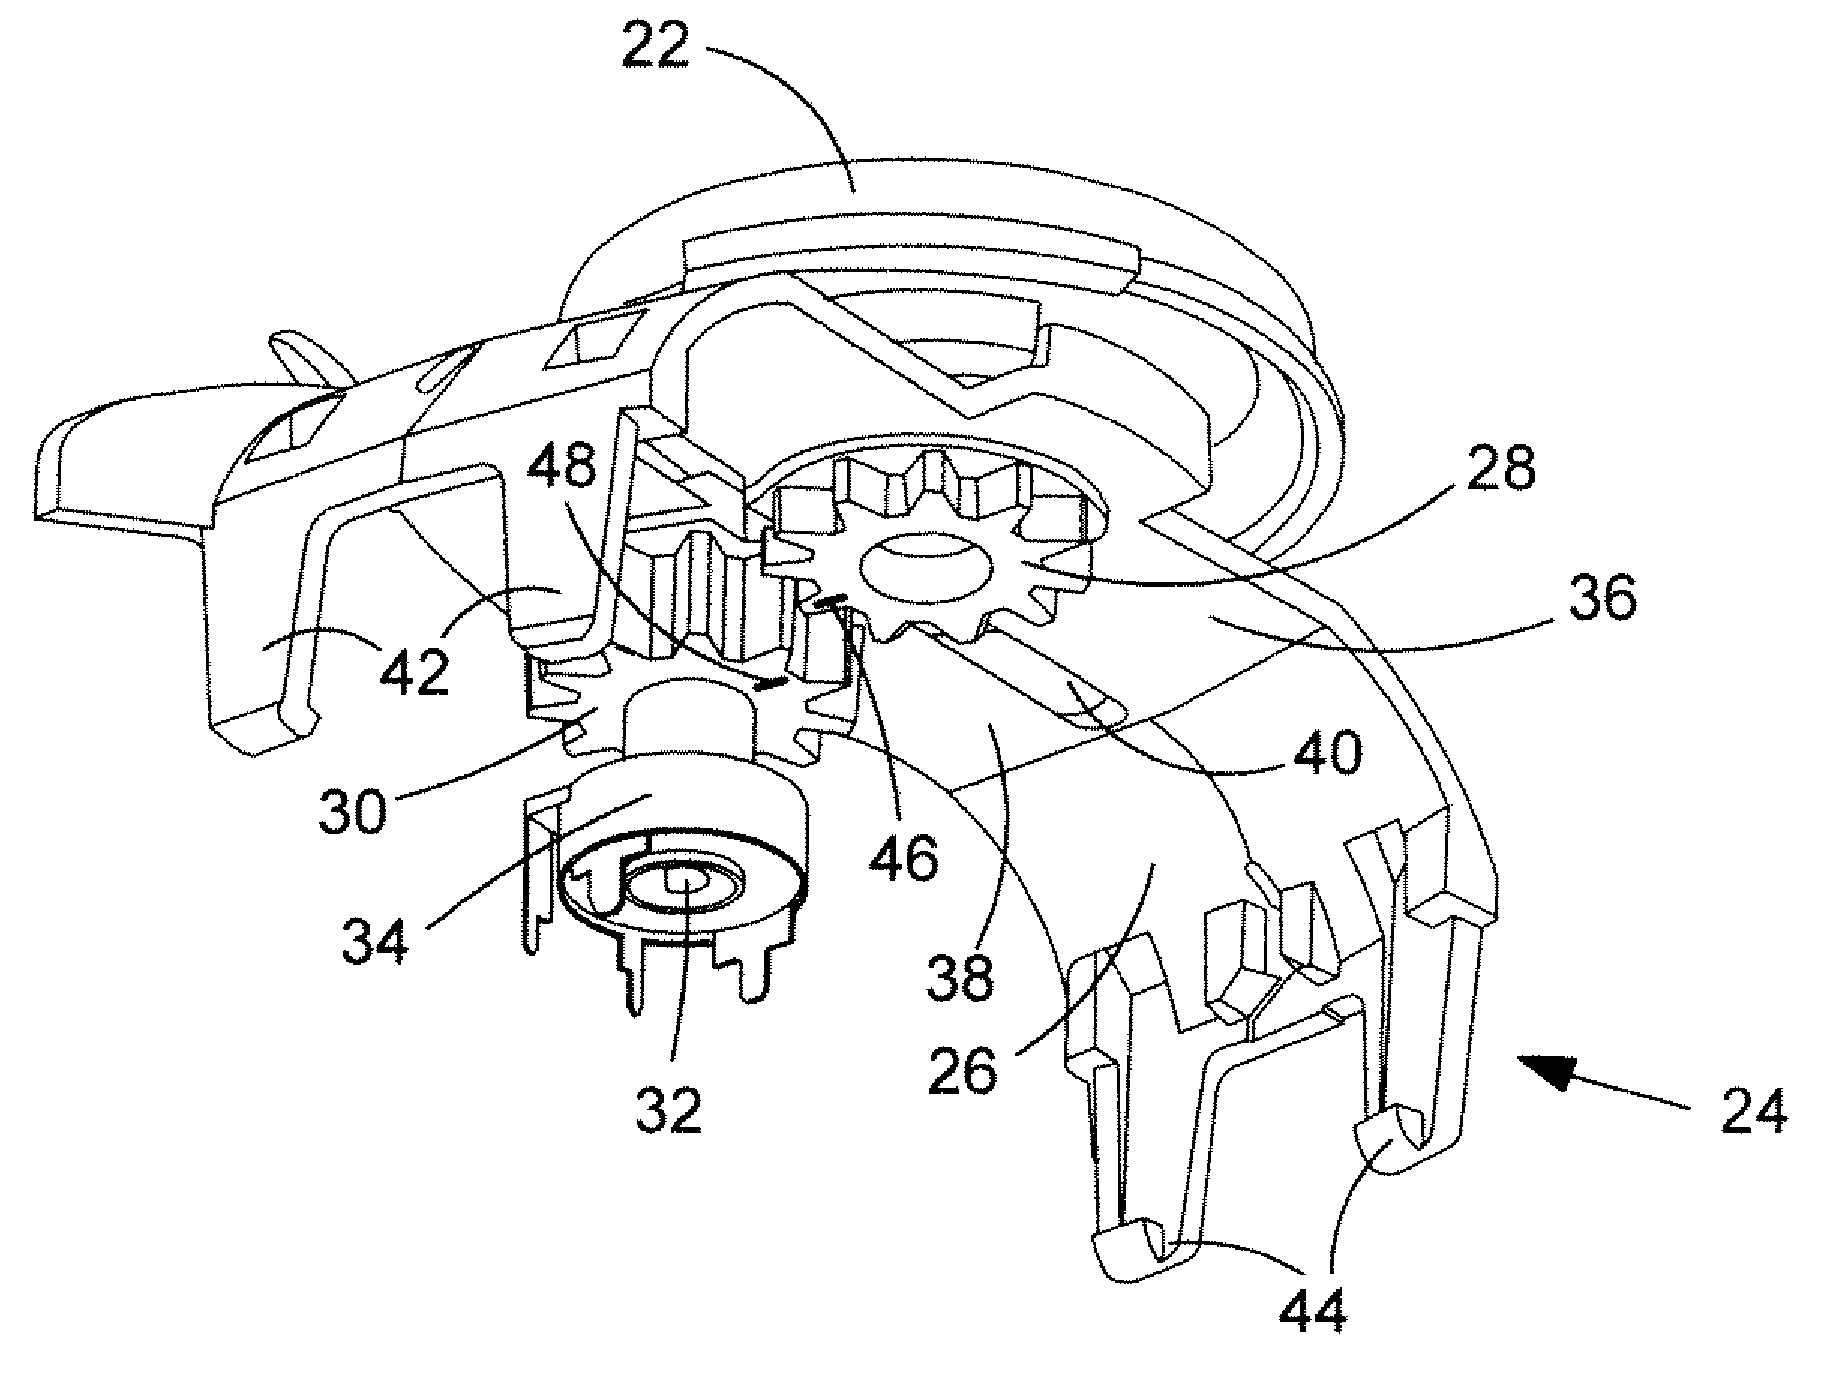 Control mechanism for a power tool